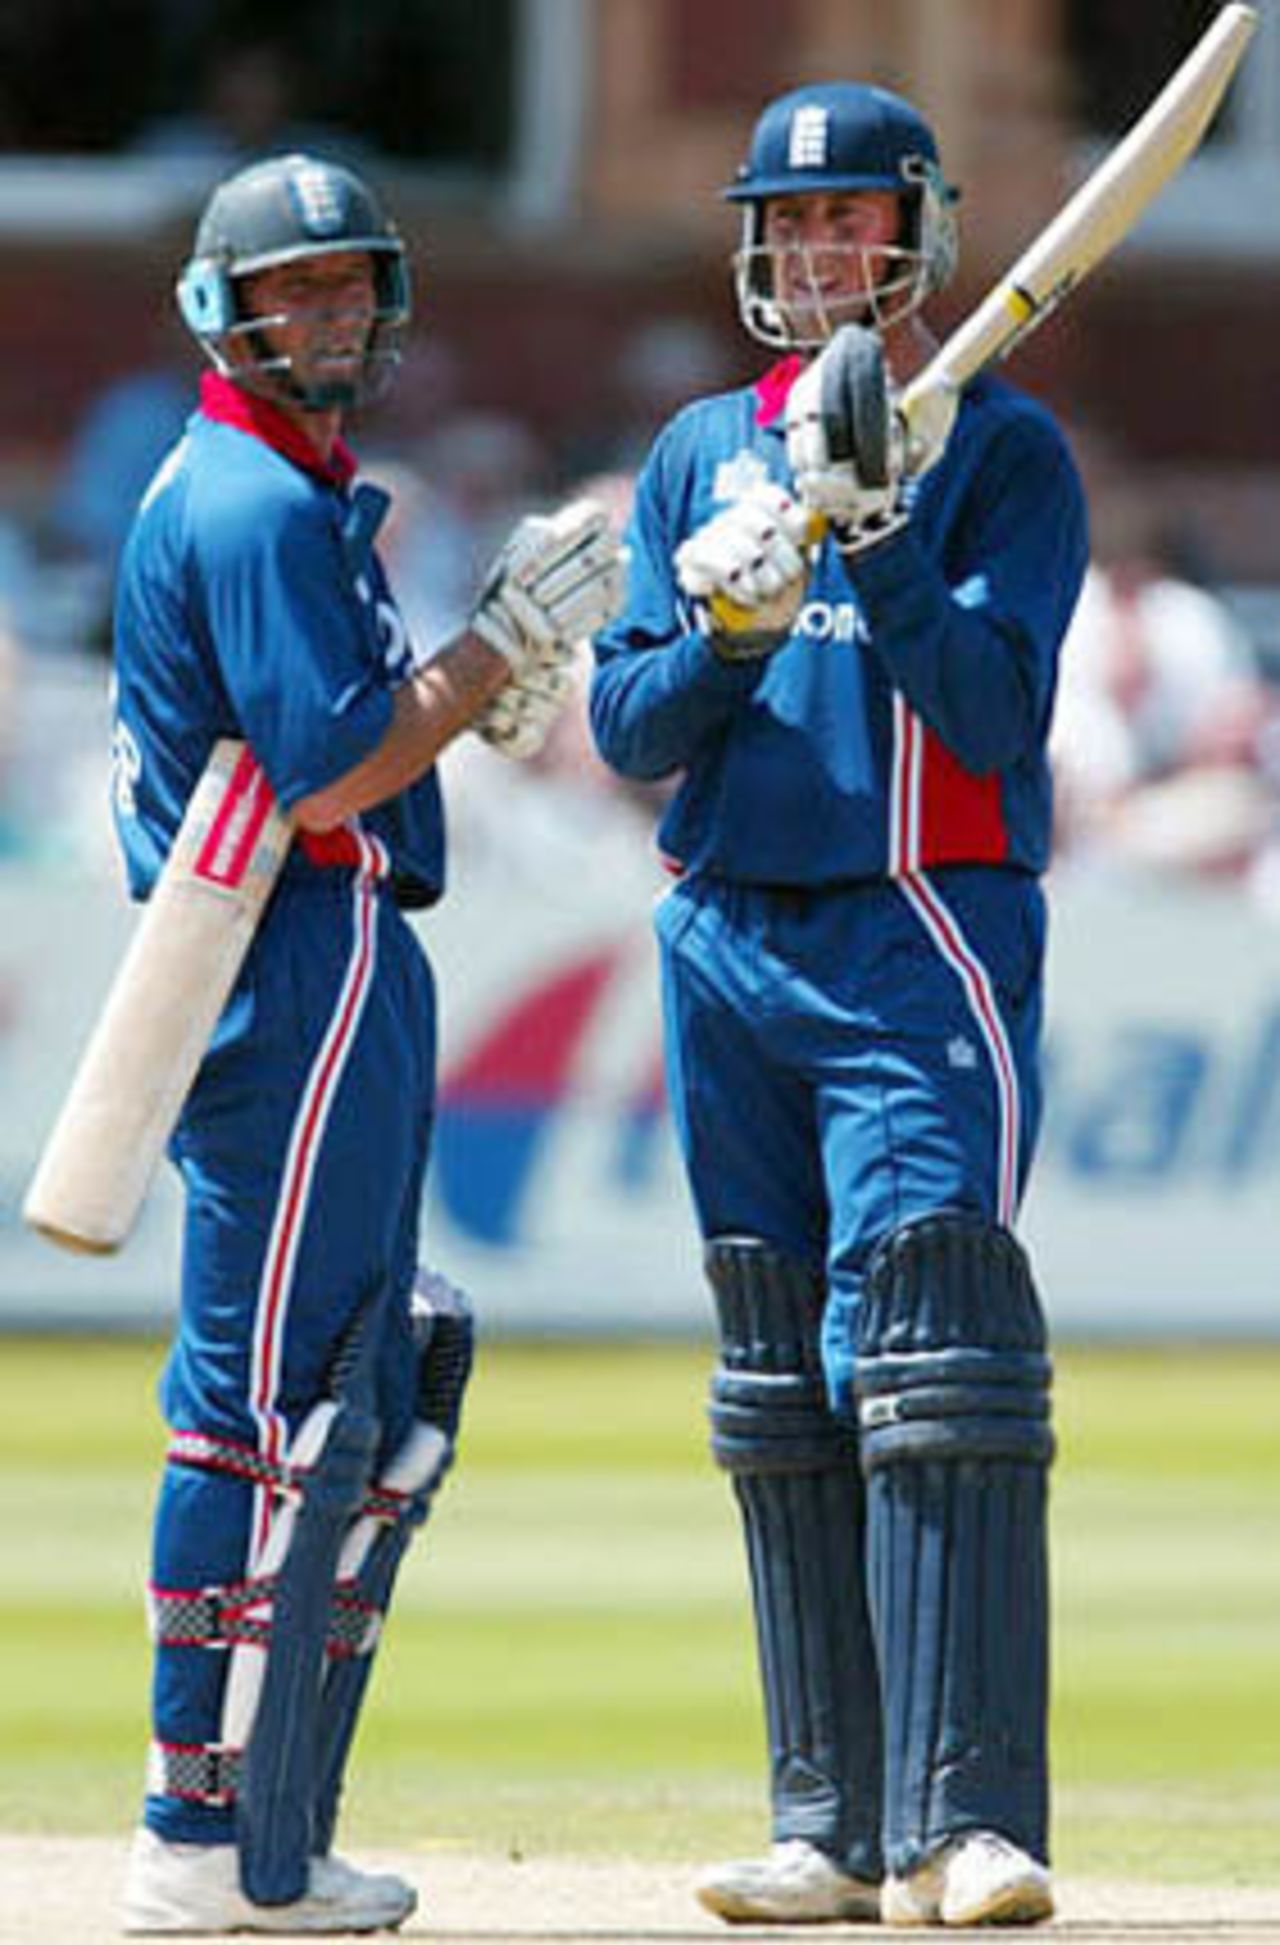 Marcus Trescothick and Nasser Hussain look at the scoreboard - the pair added 185 together